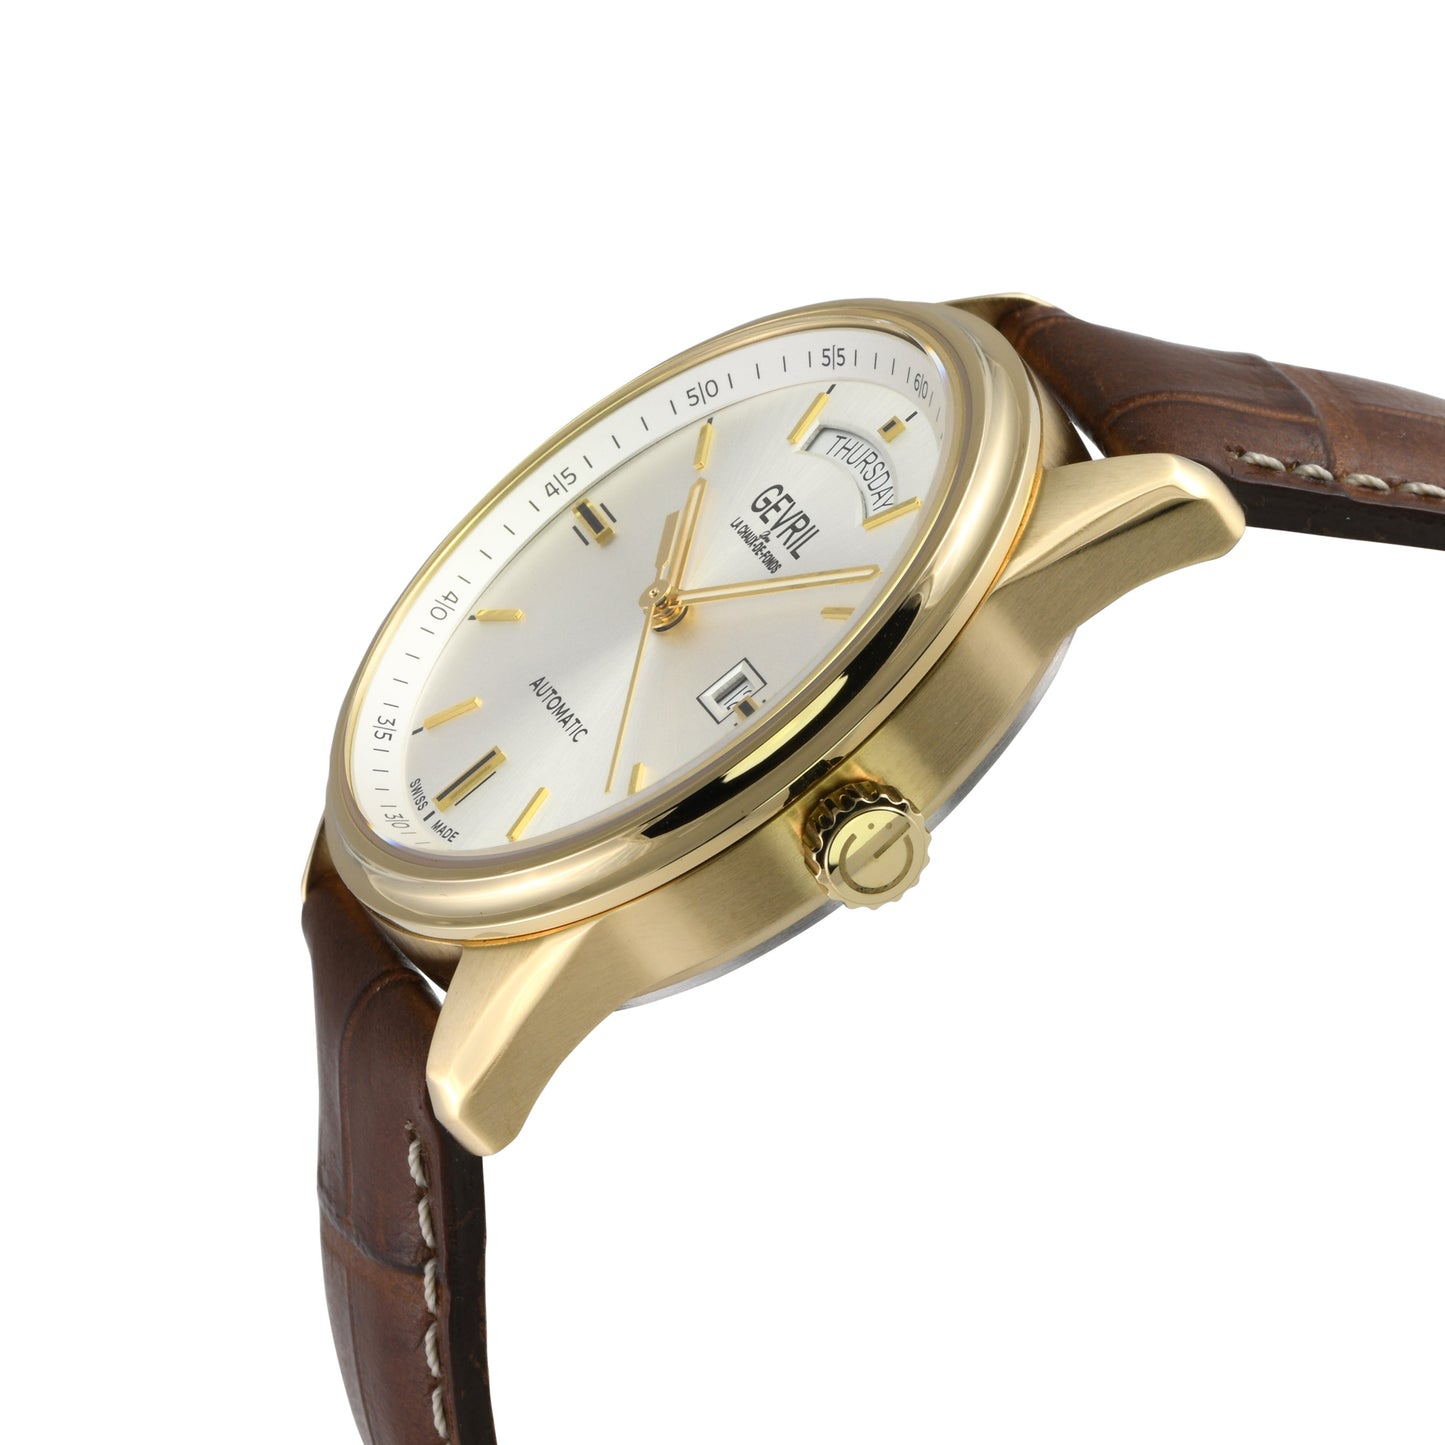 Gevril-Luxury-Swiss-Watches-Gevril Excelsior-48203